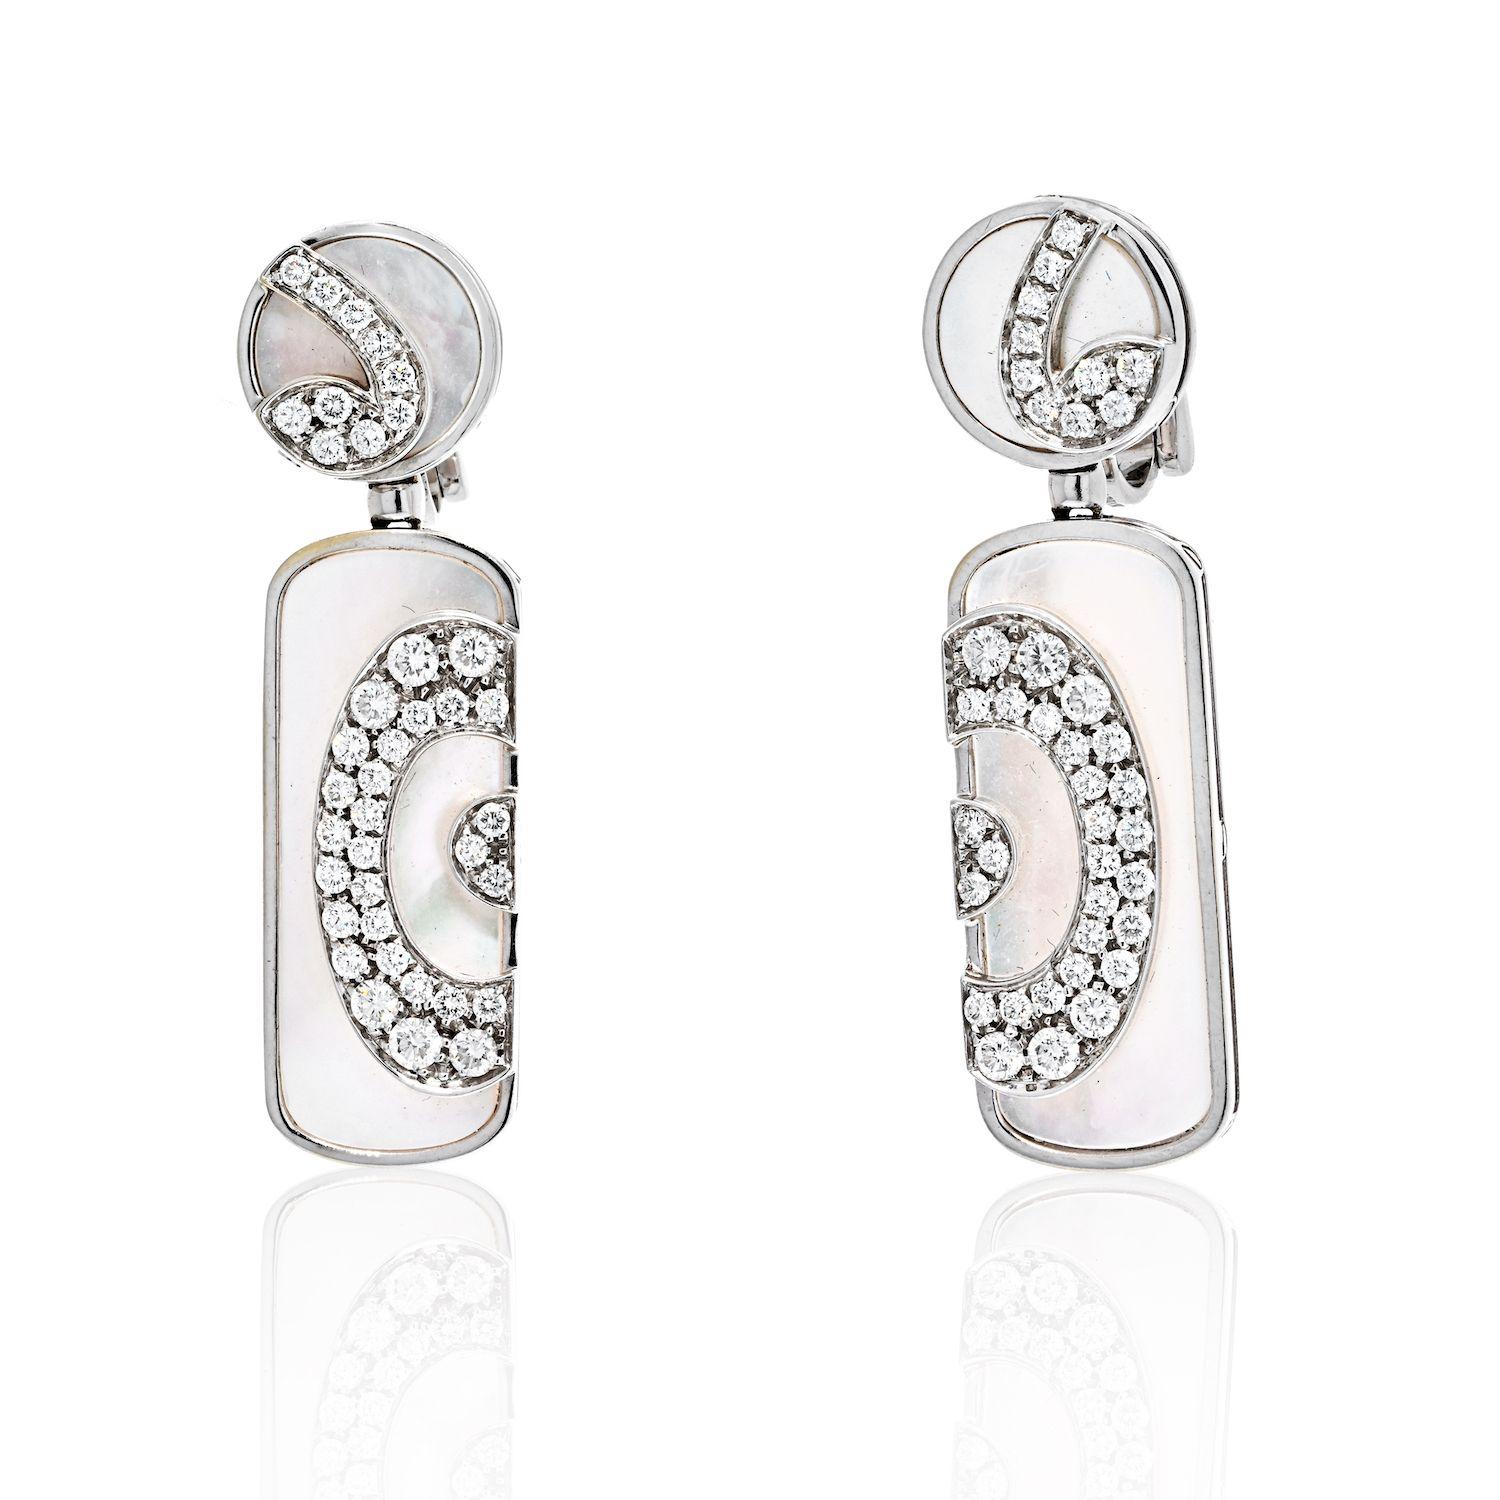 White Gold, Mother-of-Pearl and Diamond Pendant Earclips.
Perfect for a cocktail party, travel, party, or just for the weekend. 
Pendants accented with mother-of-pearl and set with 76 round diamonds.
Diamonds weighing a total of approximately 2.00